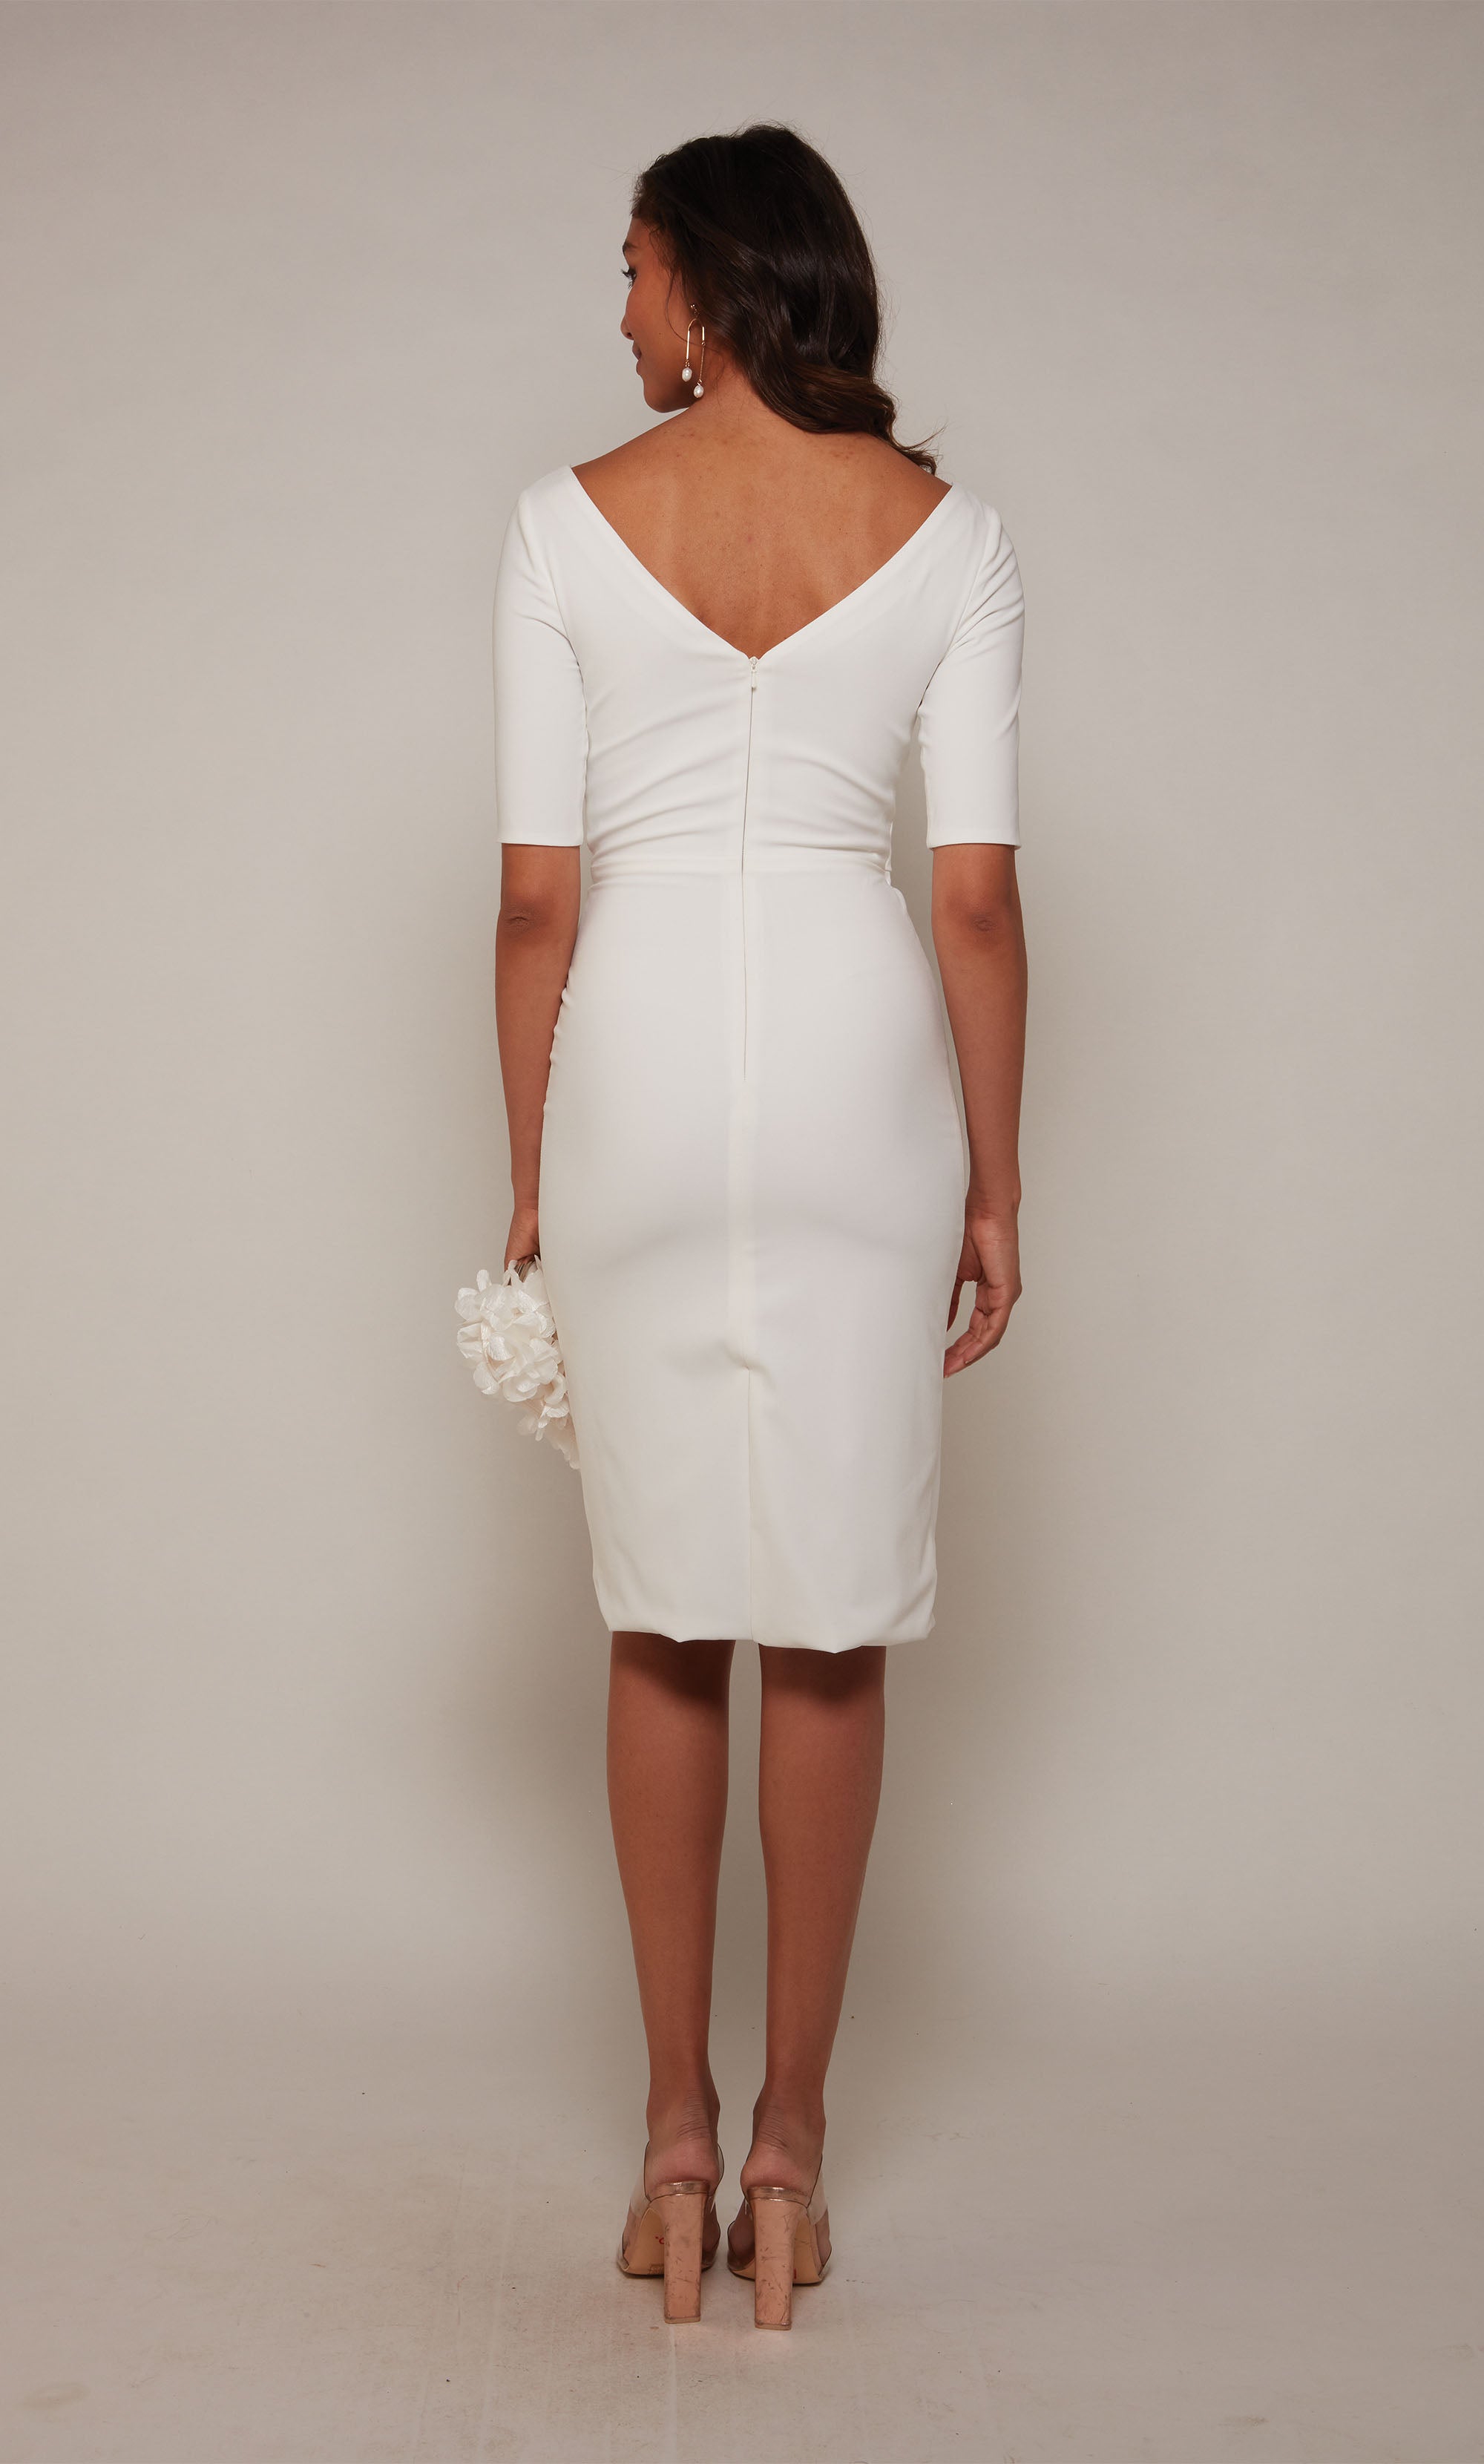 A fitted, knee length wedding dress with an off center V-neckline and 3/4 sleeves in ivory.